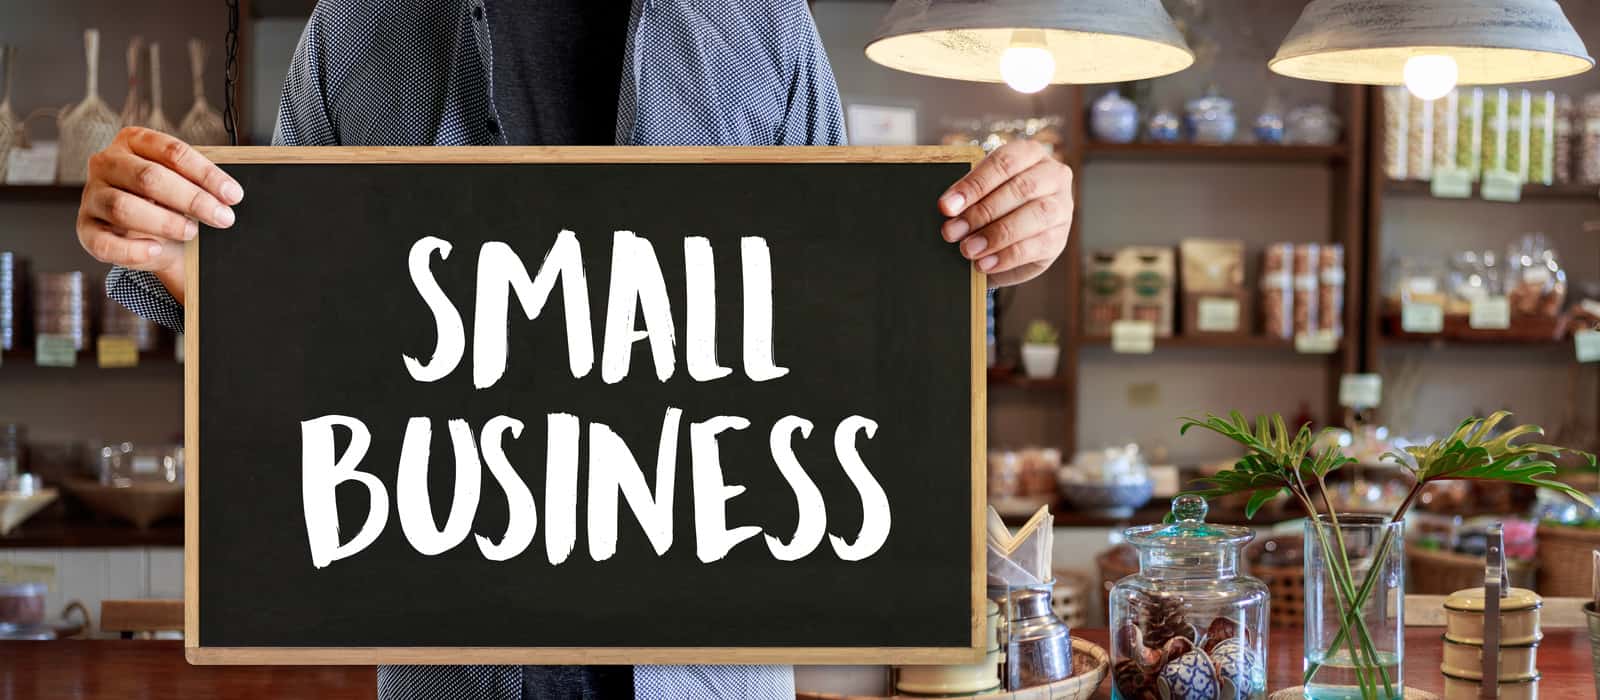 Small Business Toolkit - 8 Steps to Small Business Success in Canada